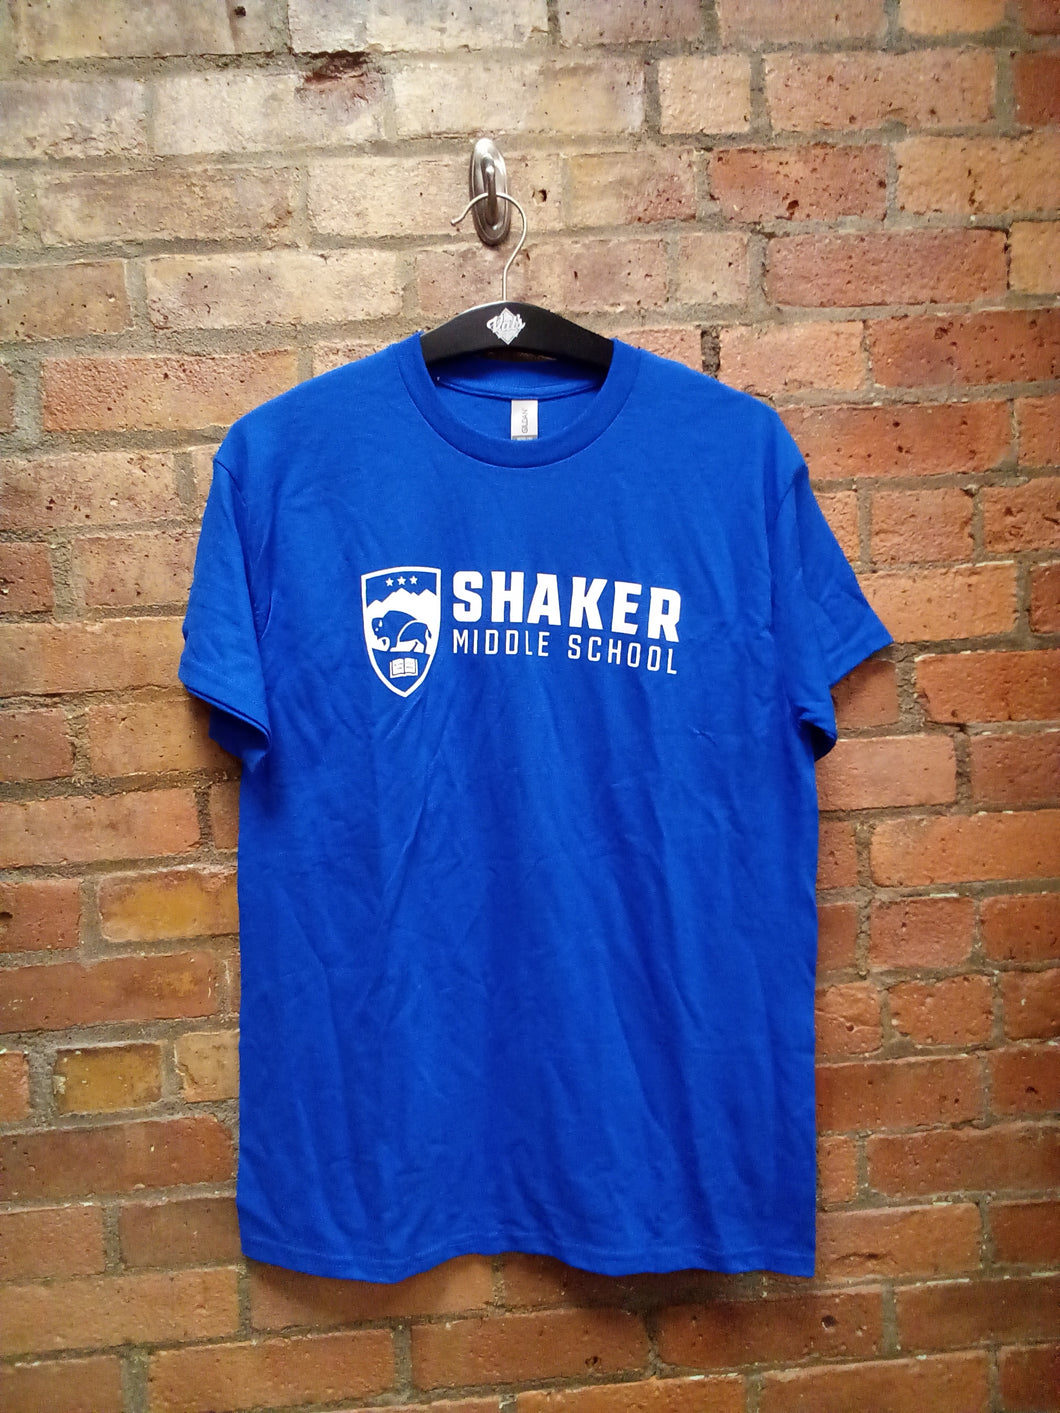 CLEARANCE - Shaker Middle School Short Sleeved T-Shirt - Size Medium